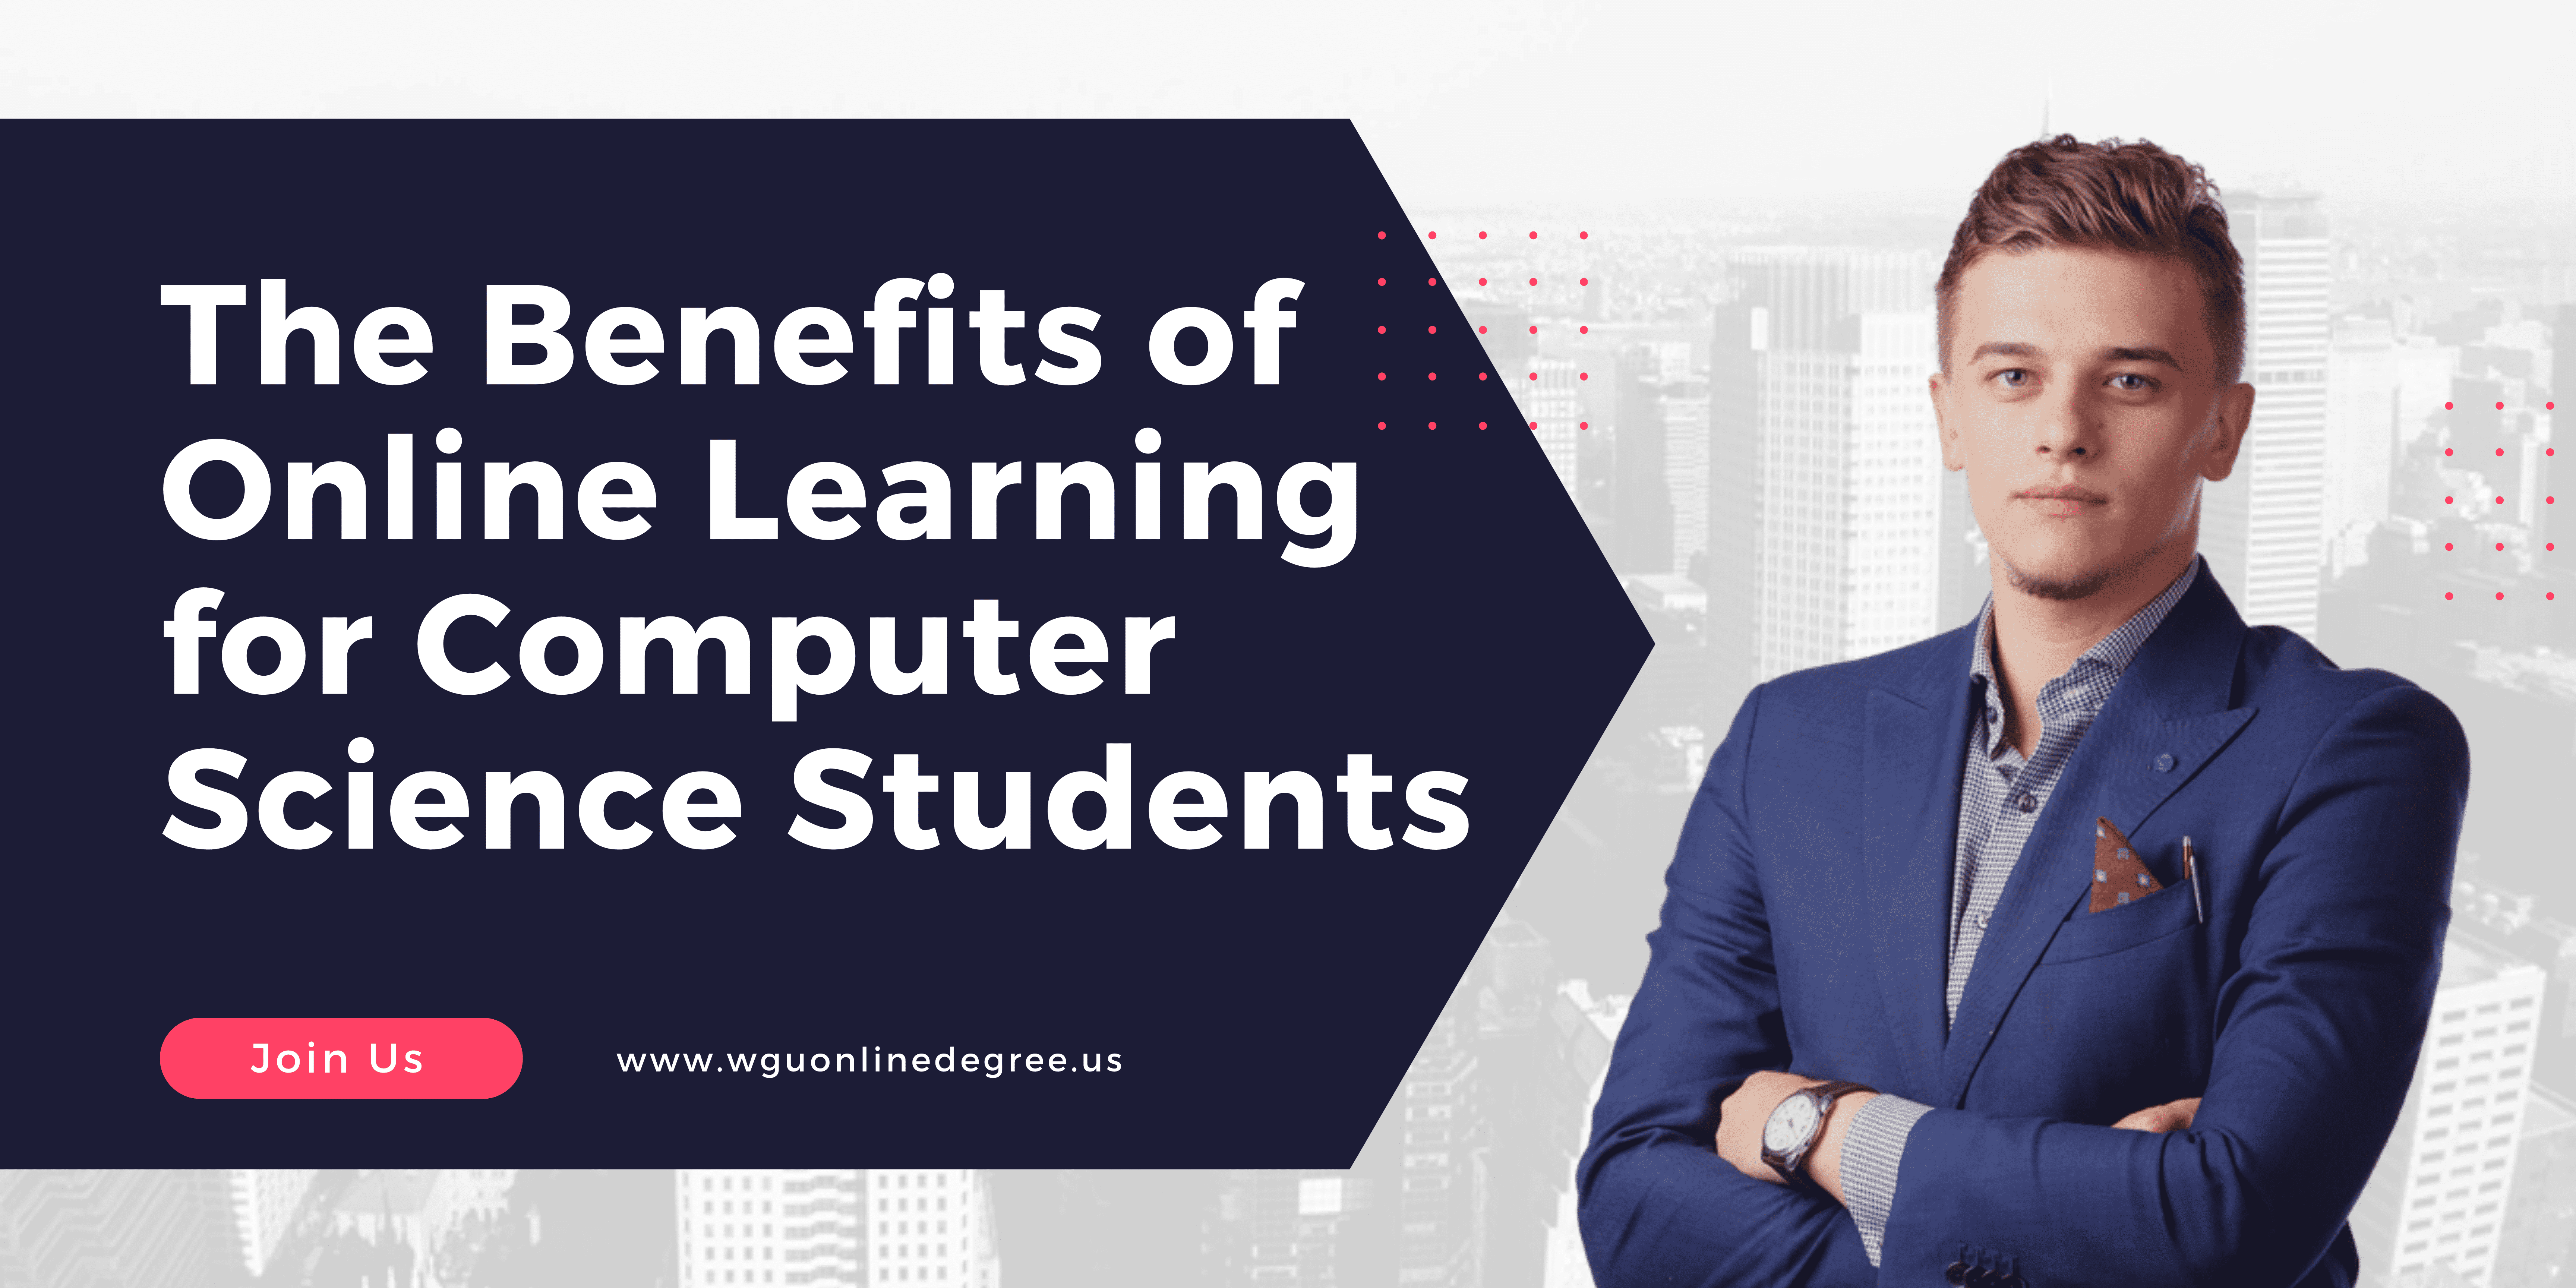 The Benefits of Online Learning for Computer Science Students